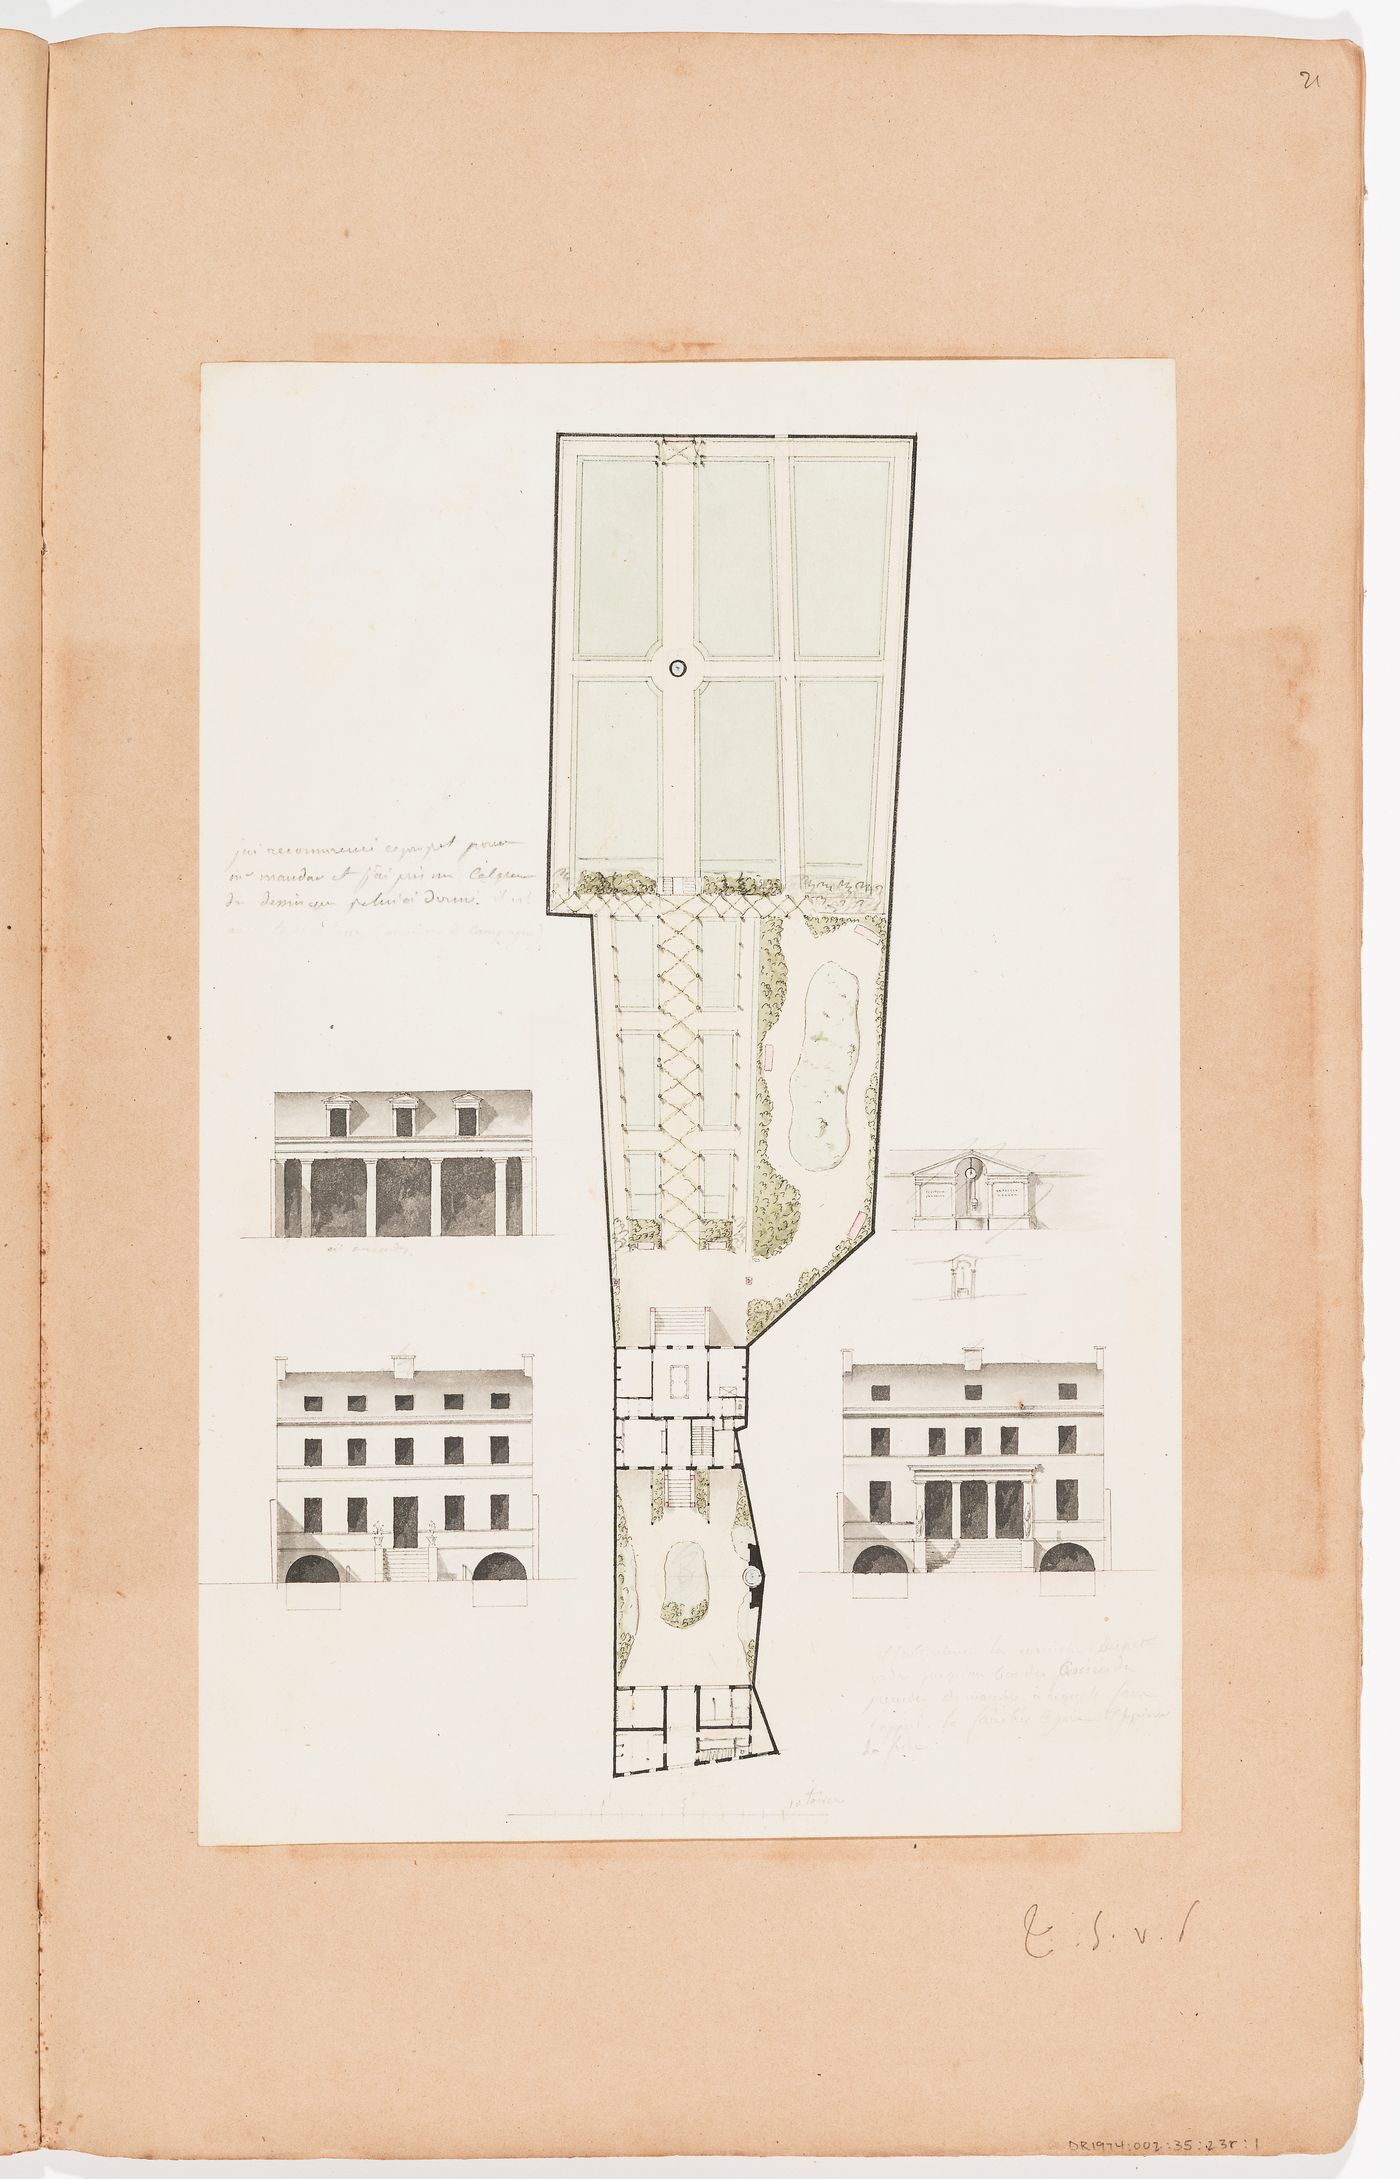 Site plan and elevations for a country house with a large garden; verso: Elevation and plans for a country house with a large garden